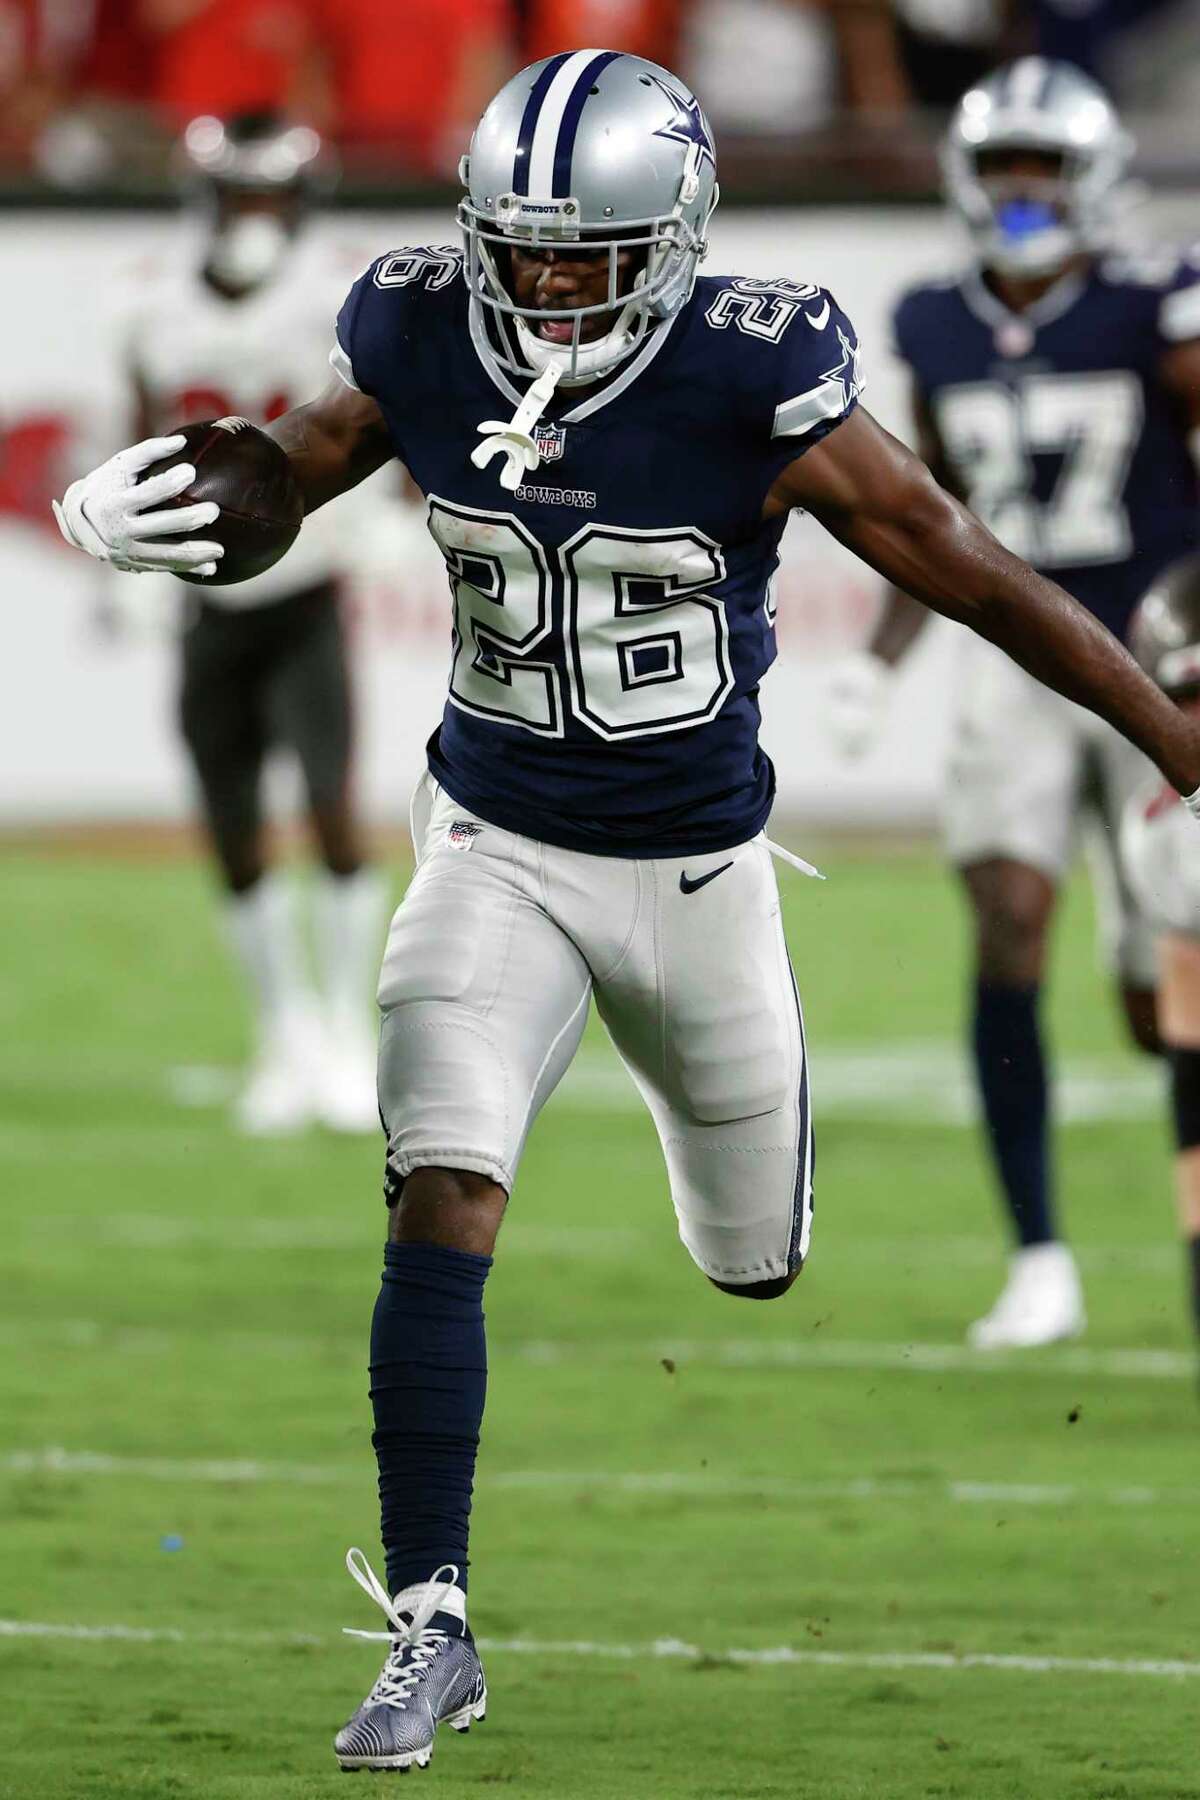 Dallas Cowboys cornerback Jourdan Lewis runs with the football after intercepting a pass by Tampa Bay Buccaneers quarterback Tom Brady during the first half of an NFL football game Thursday, Sept. 9, 2021, in Tampa, Fla.